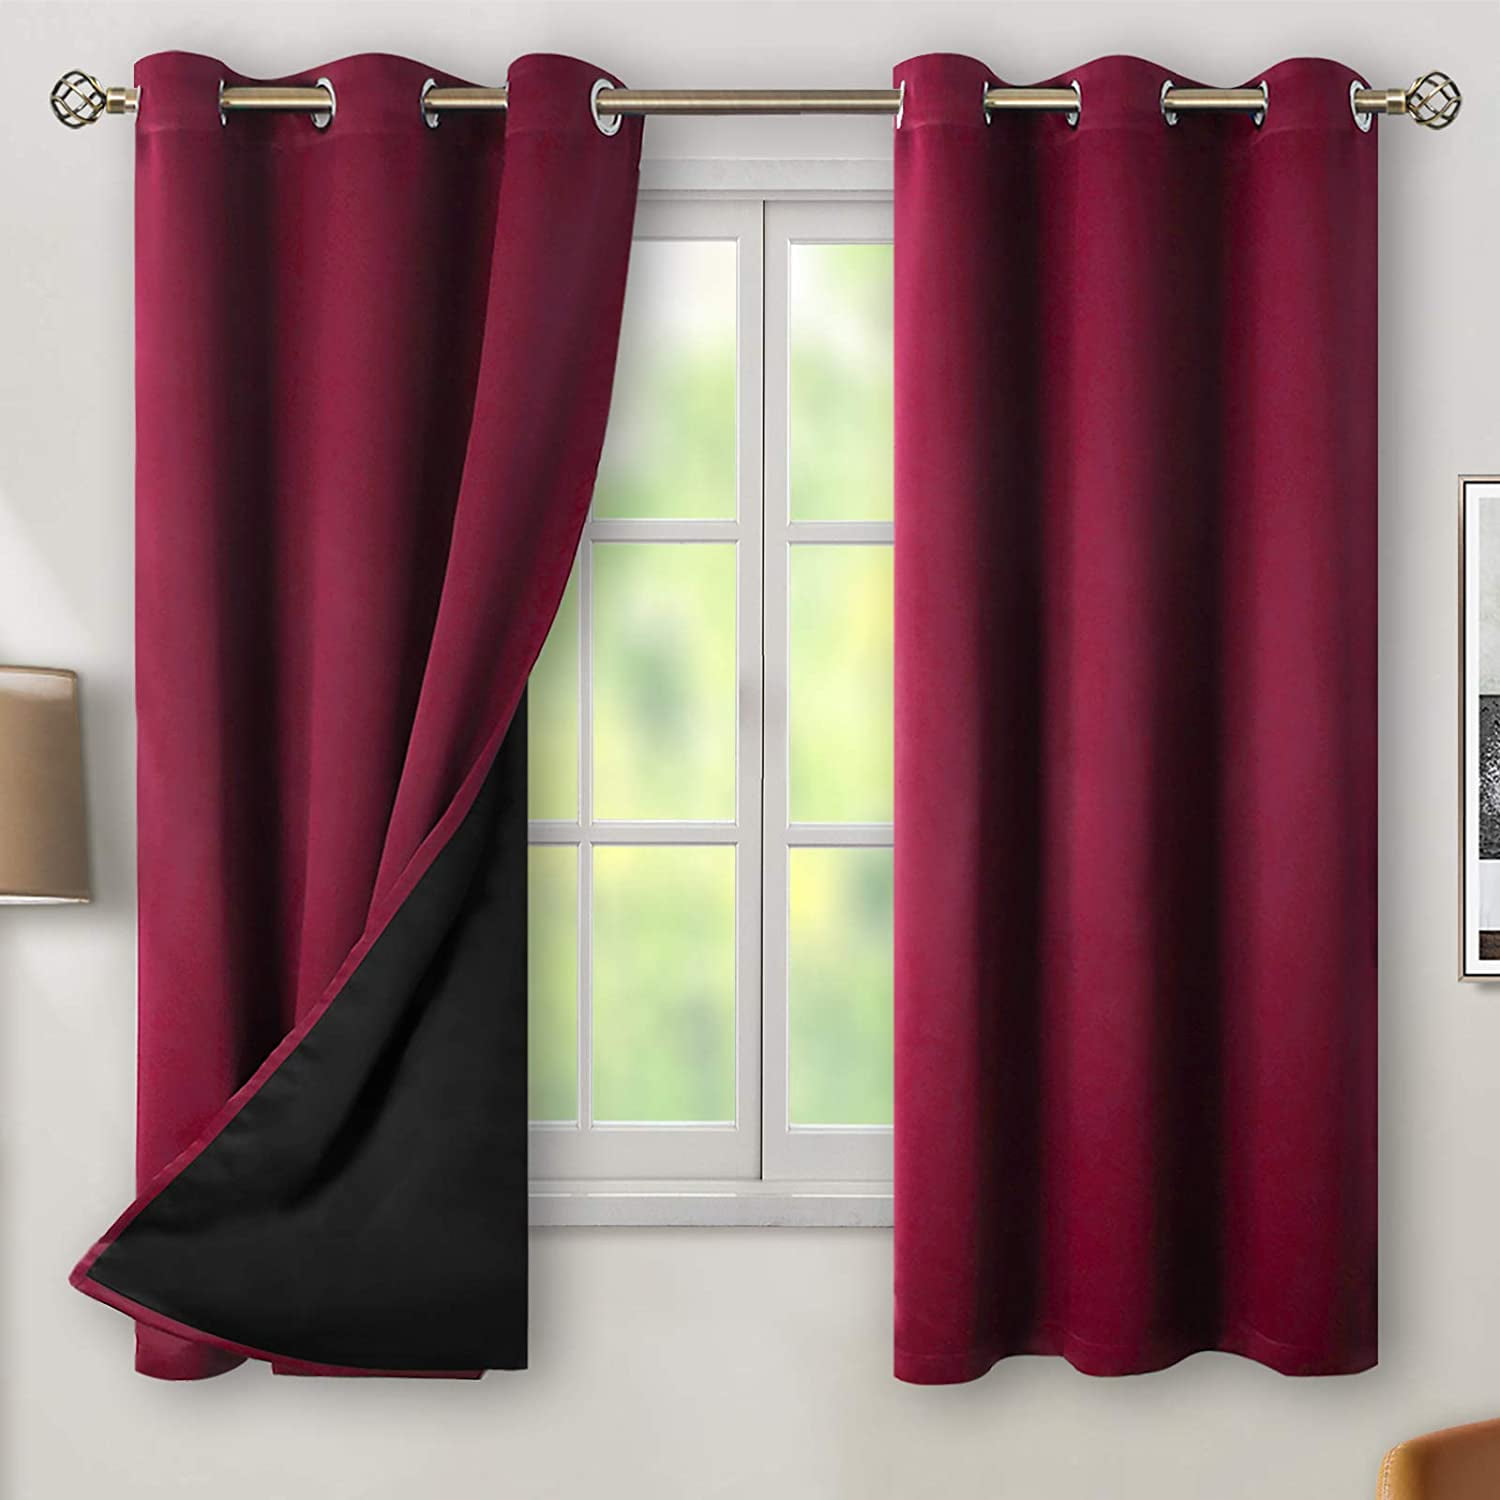 Blackout Curtains for Bedroom Thermal Insulated Room Darkening Curtains Burgundy 